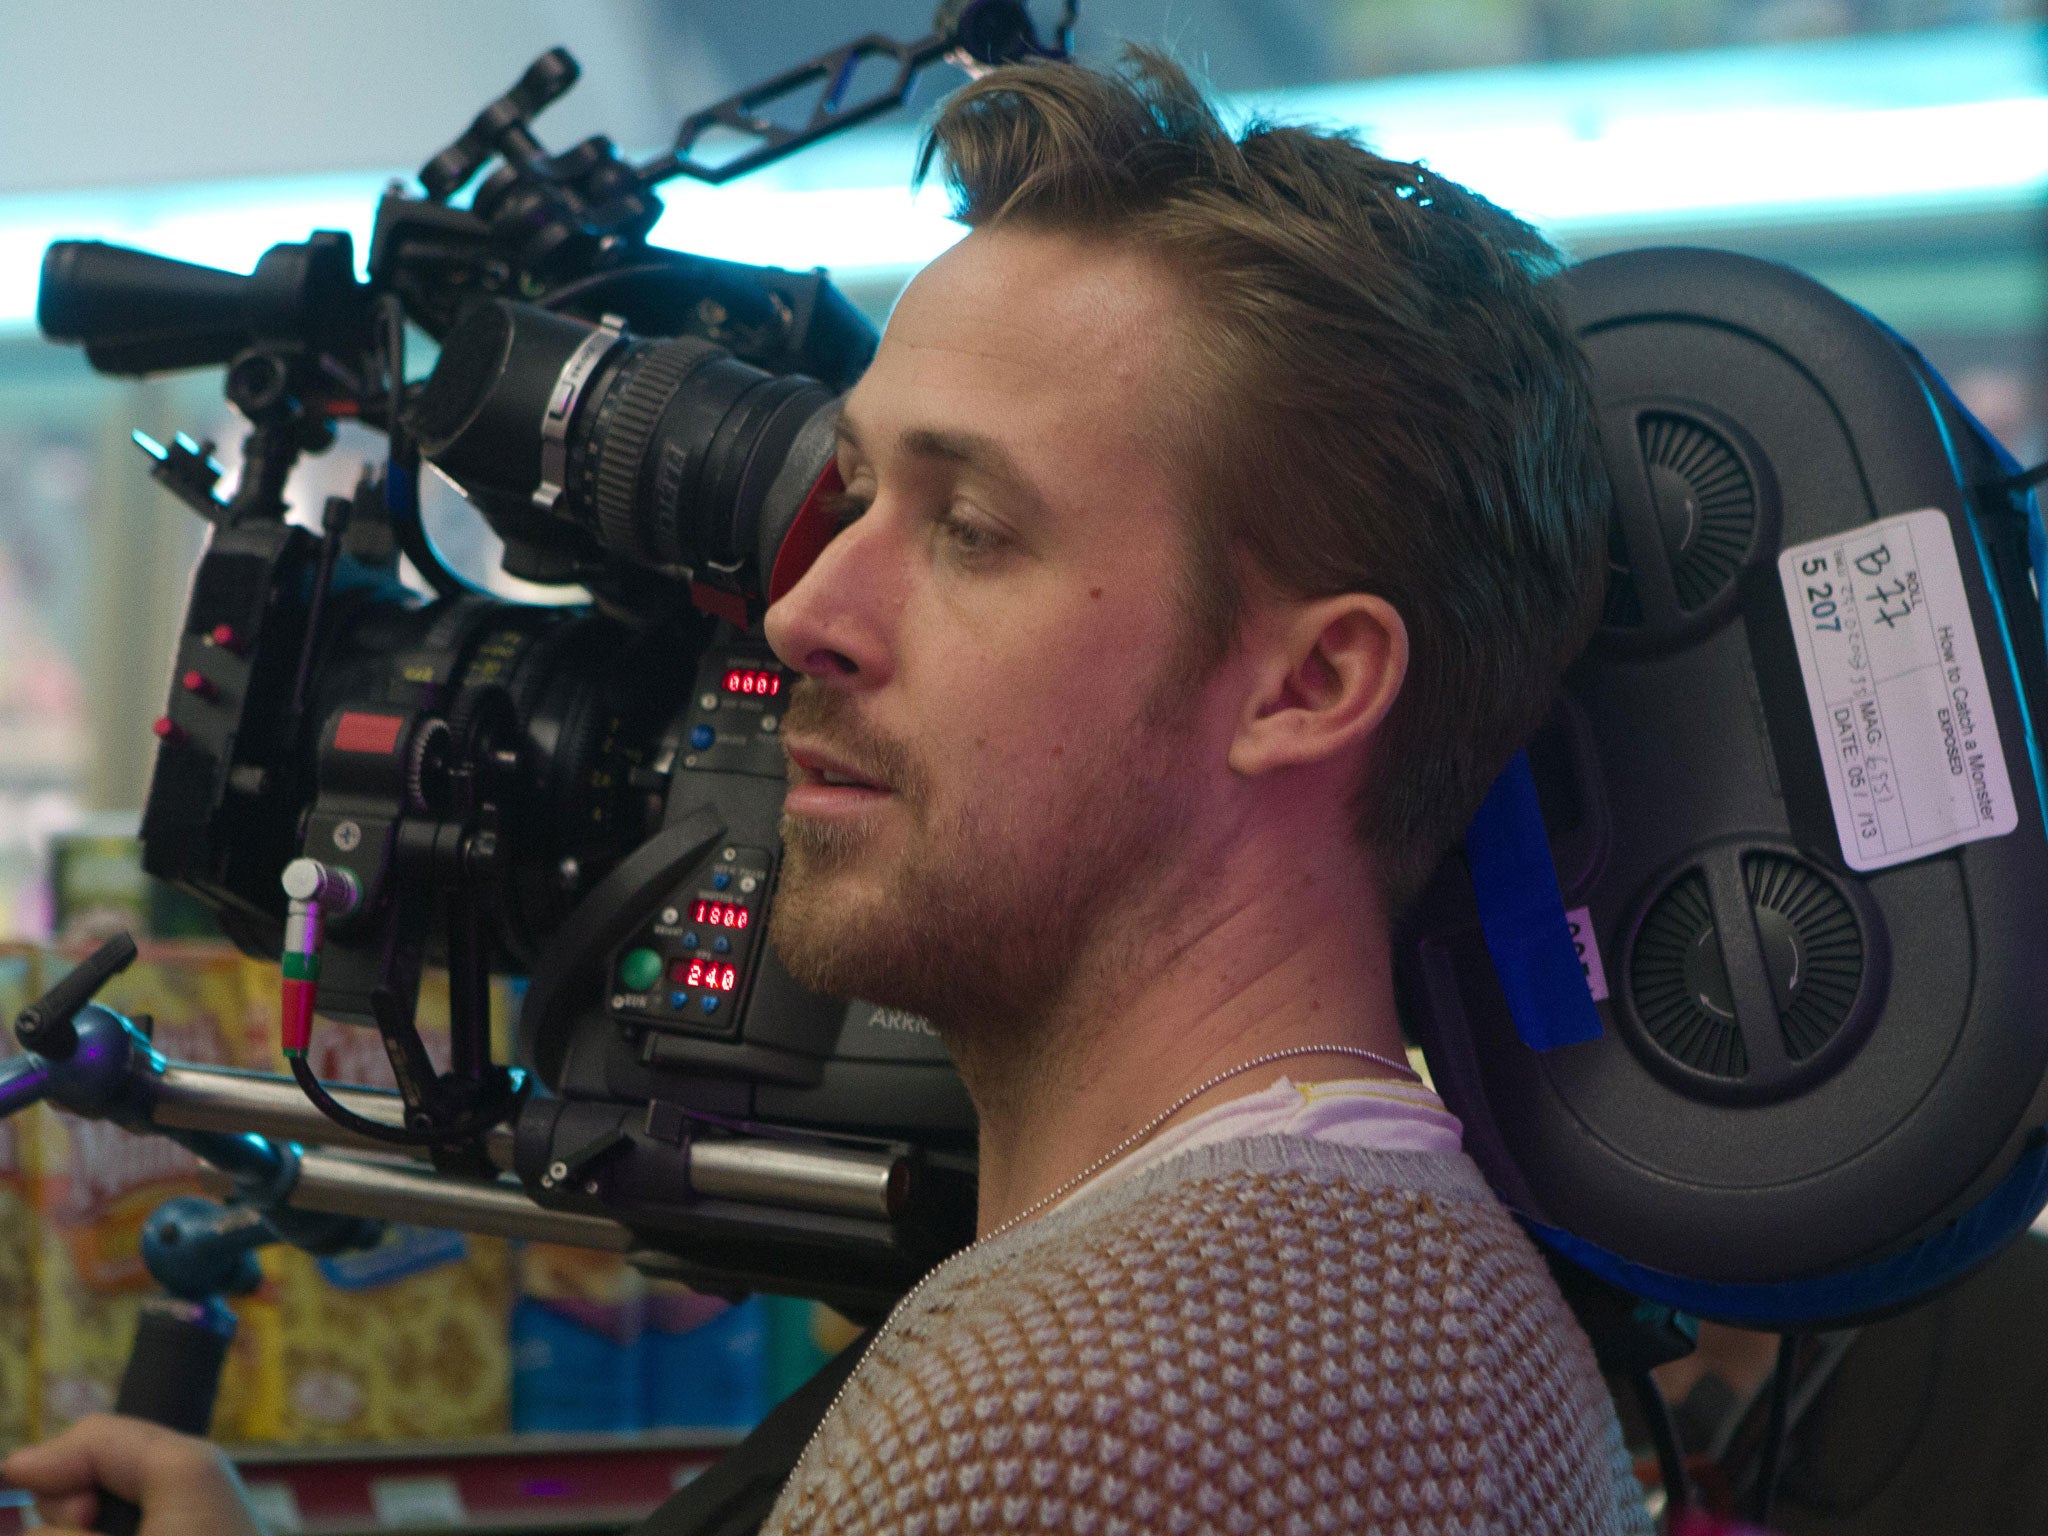 Ryan Gosling's Lost River was the actor's directorial debut